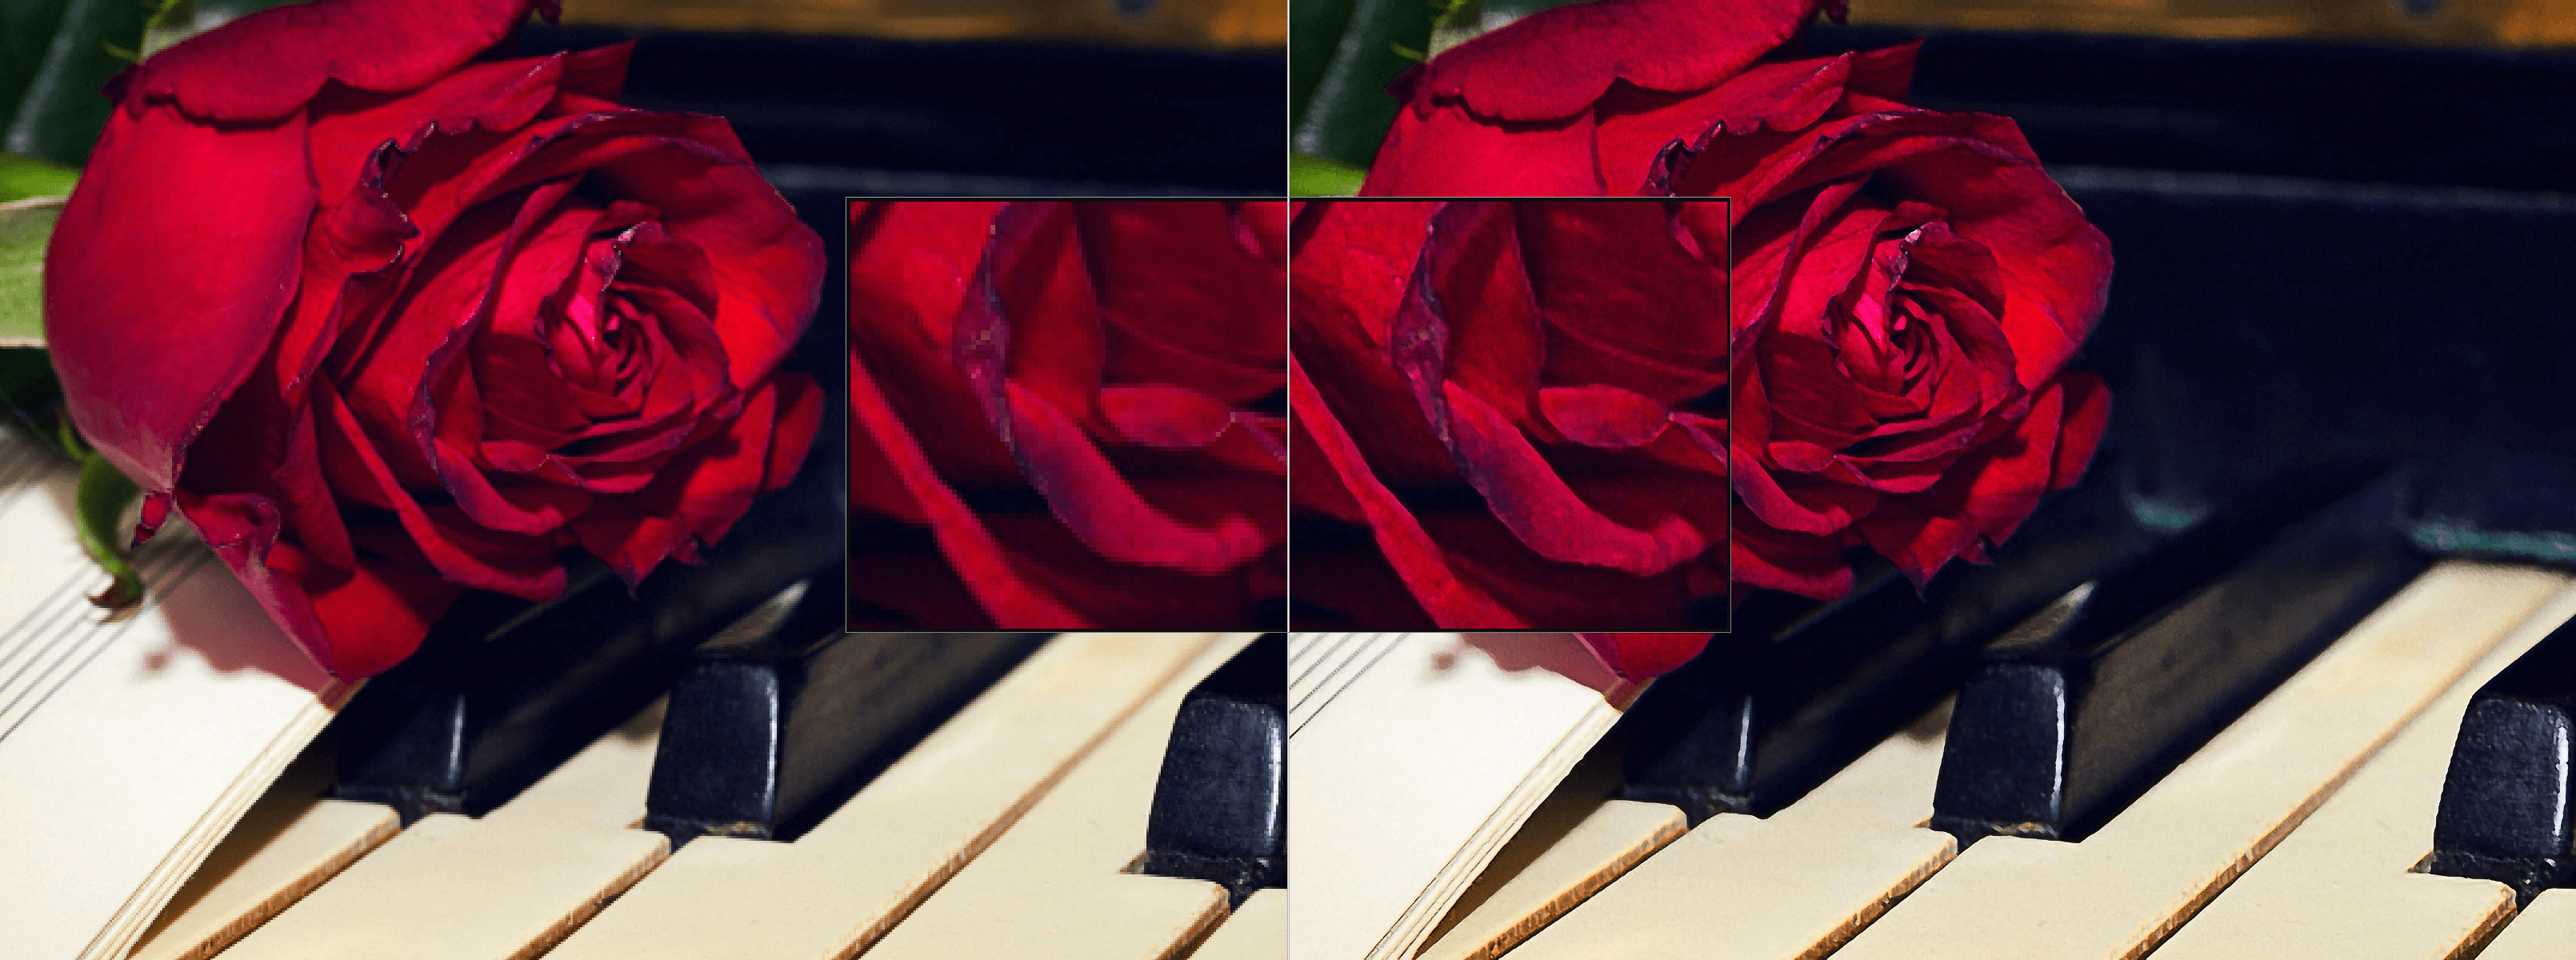 ZOOM #2 - Example roses 